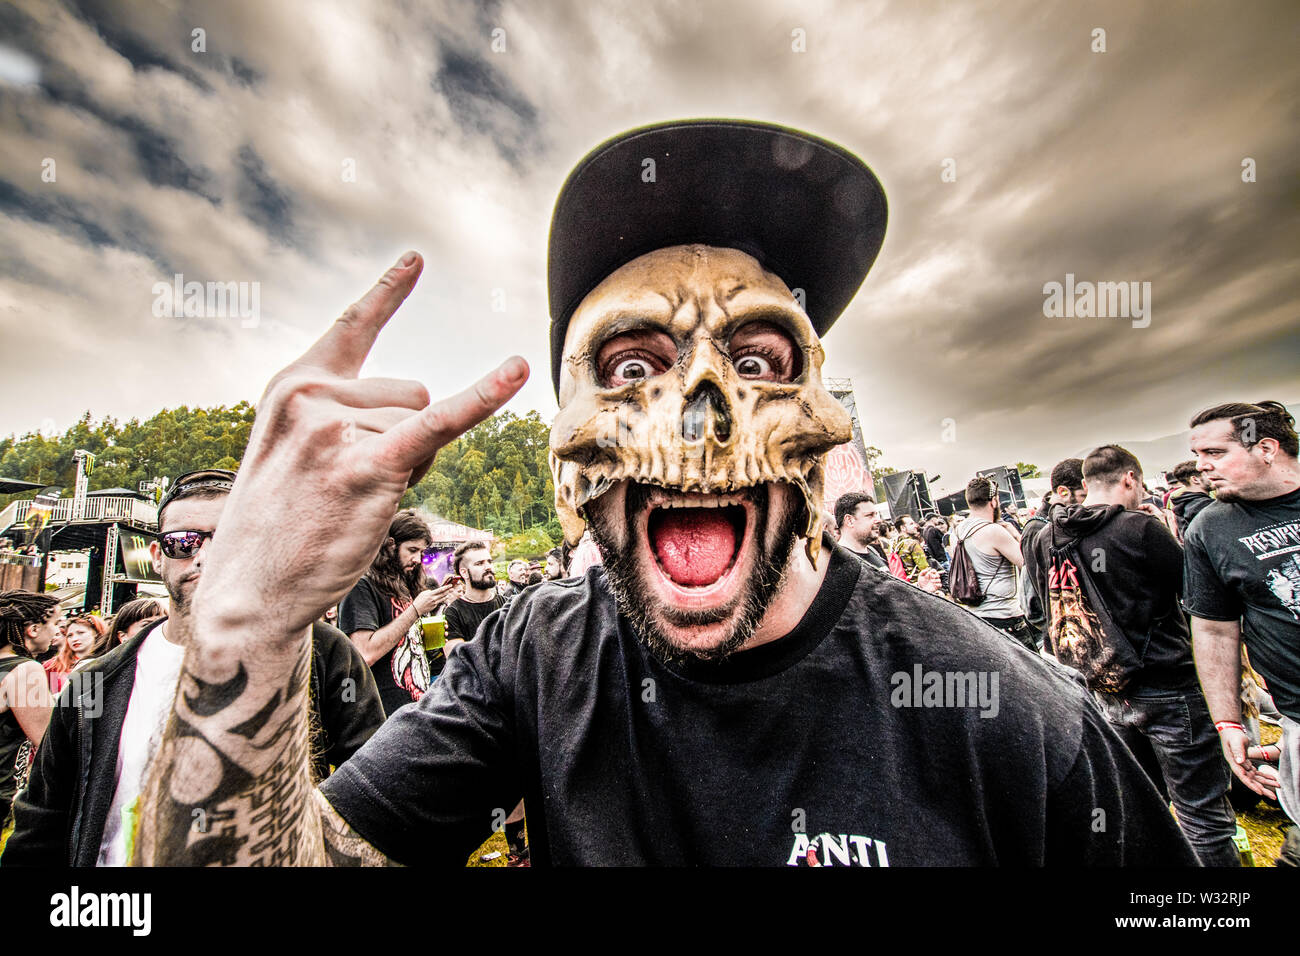 A metalhead with a skull mask during the Resurrection Fest music festival in Viveiro, northern Spain.Resurrection Fest is a music festival of extreme music, metal, hardcore, punk, stoner and doom. This was the 14th edition. It featured international bands like Slipknot, Slayer, Parkway Drive, Brant Bjork, Radio Moscow, Within Temptation, Lamb of God or King Diamond. Stock Photo